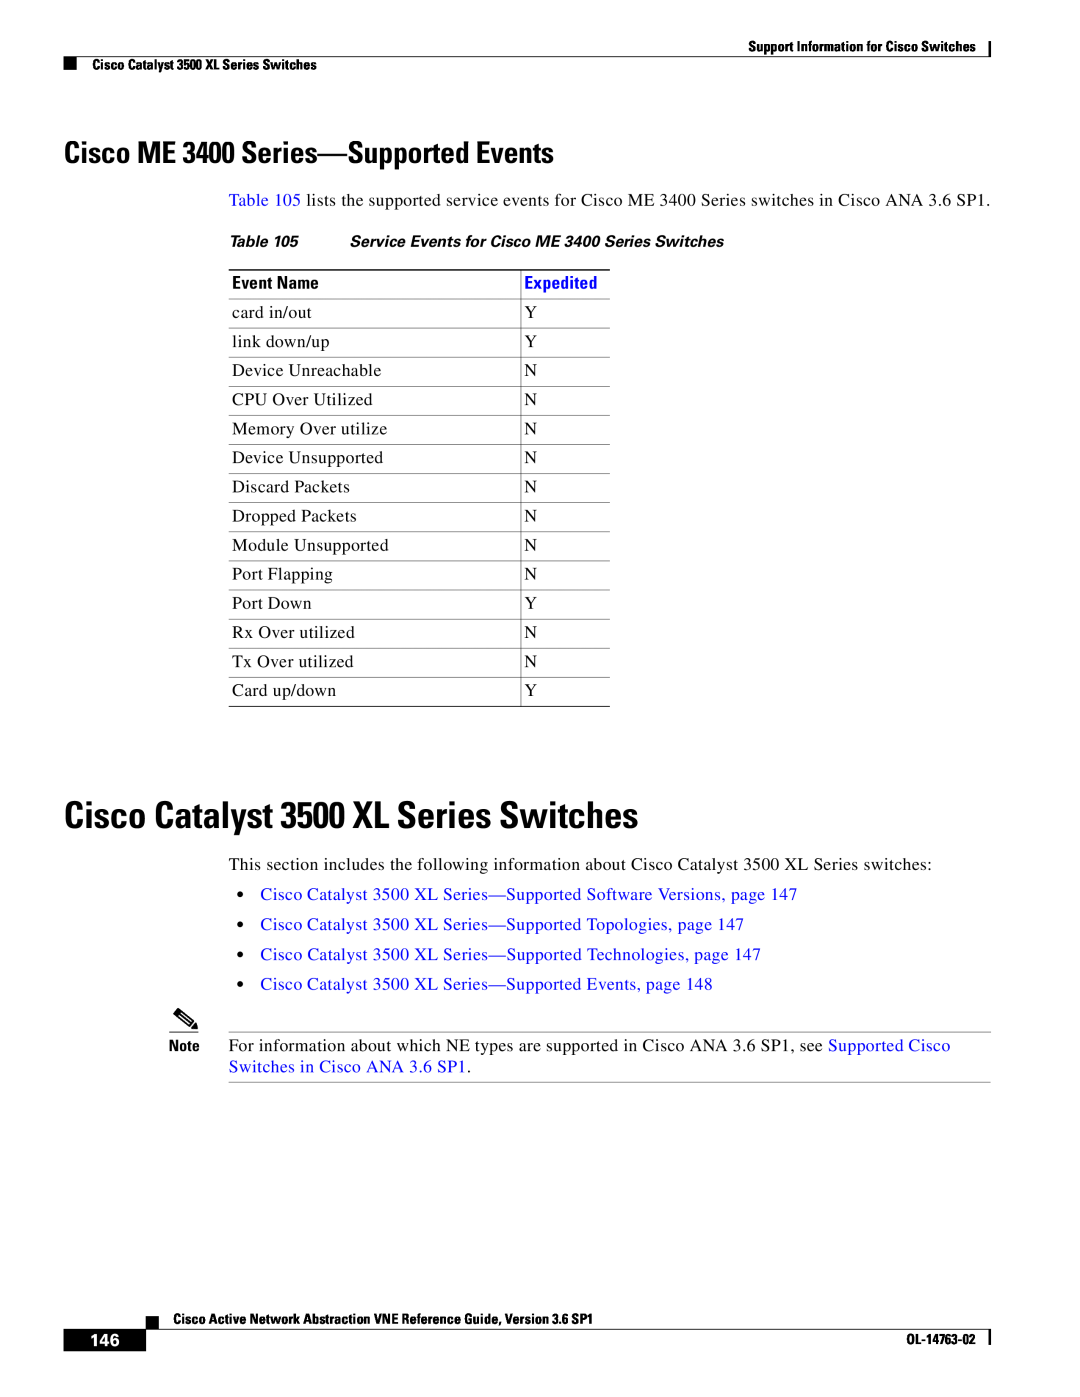 Cisco Systems OL-14763-02 manual Cisco Catalyst 3500 XL Series Switches, Cisco ME 3400 Series-Supported Events, Event Name 